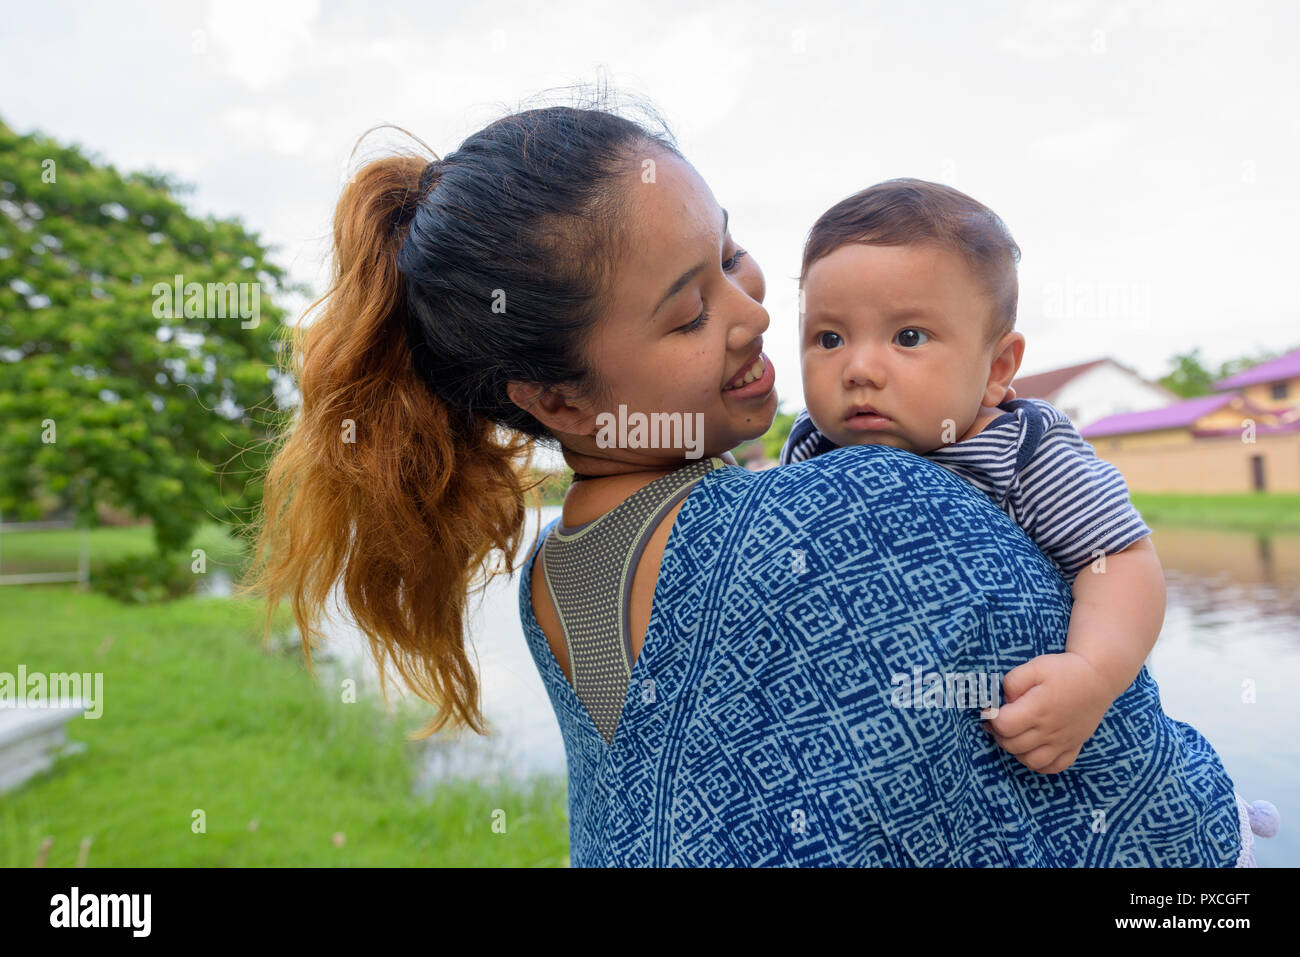 Mother and baby son bonding together at the park Stock Photo